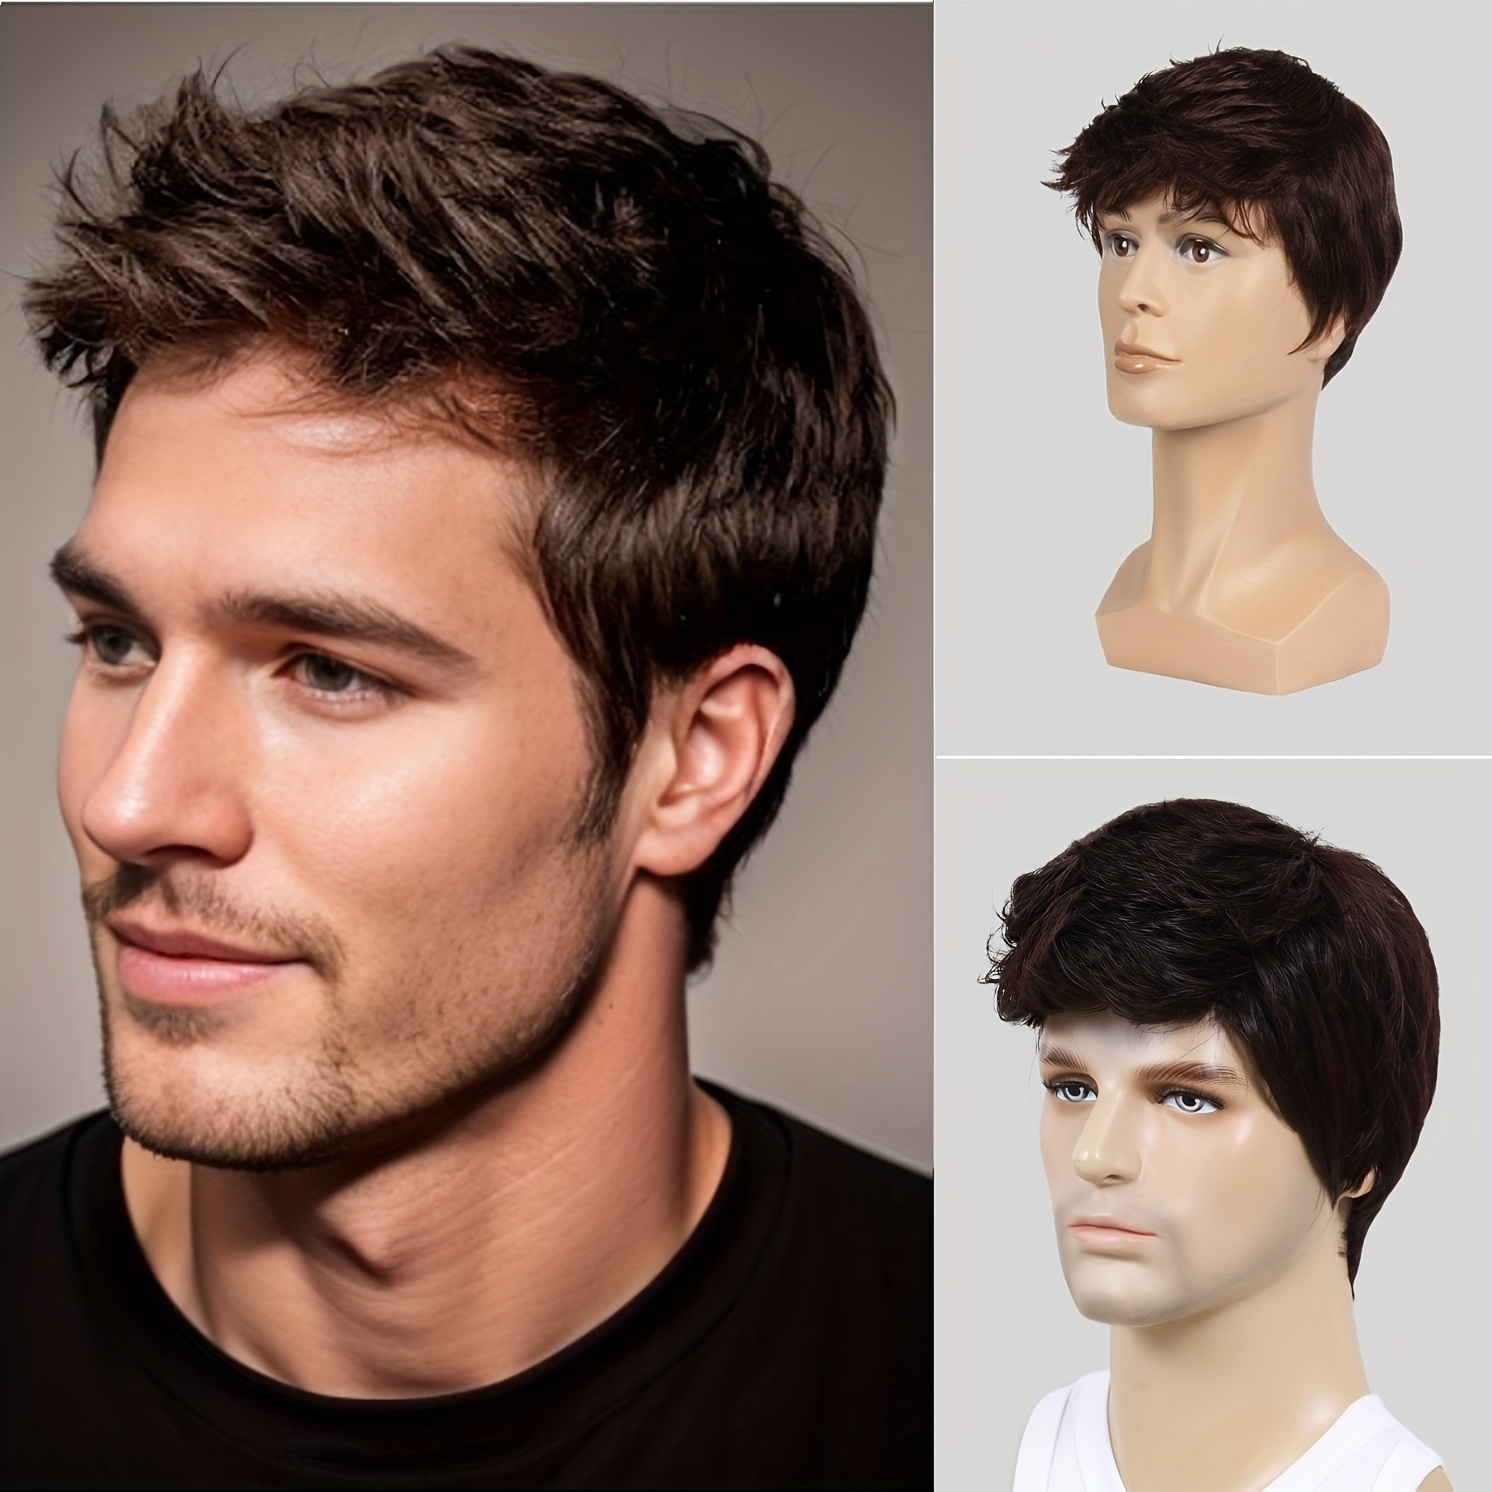 anime man hairstyle fancy - Google Search  Anime haircut, Natural hair  styles, Wig hairstyles